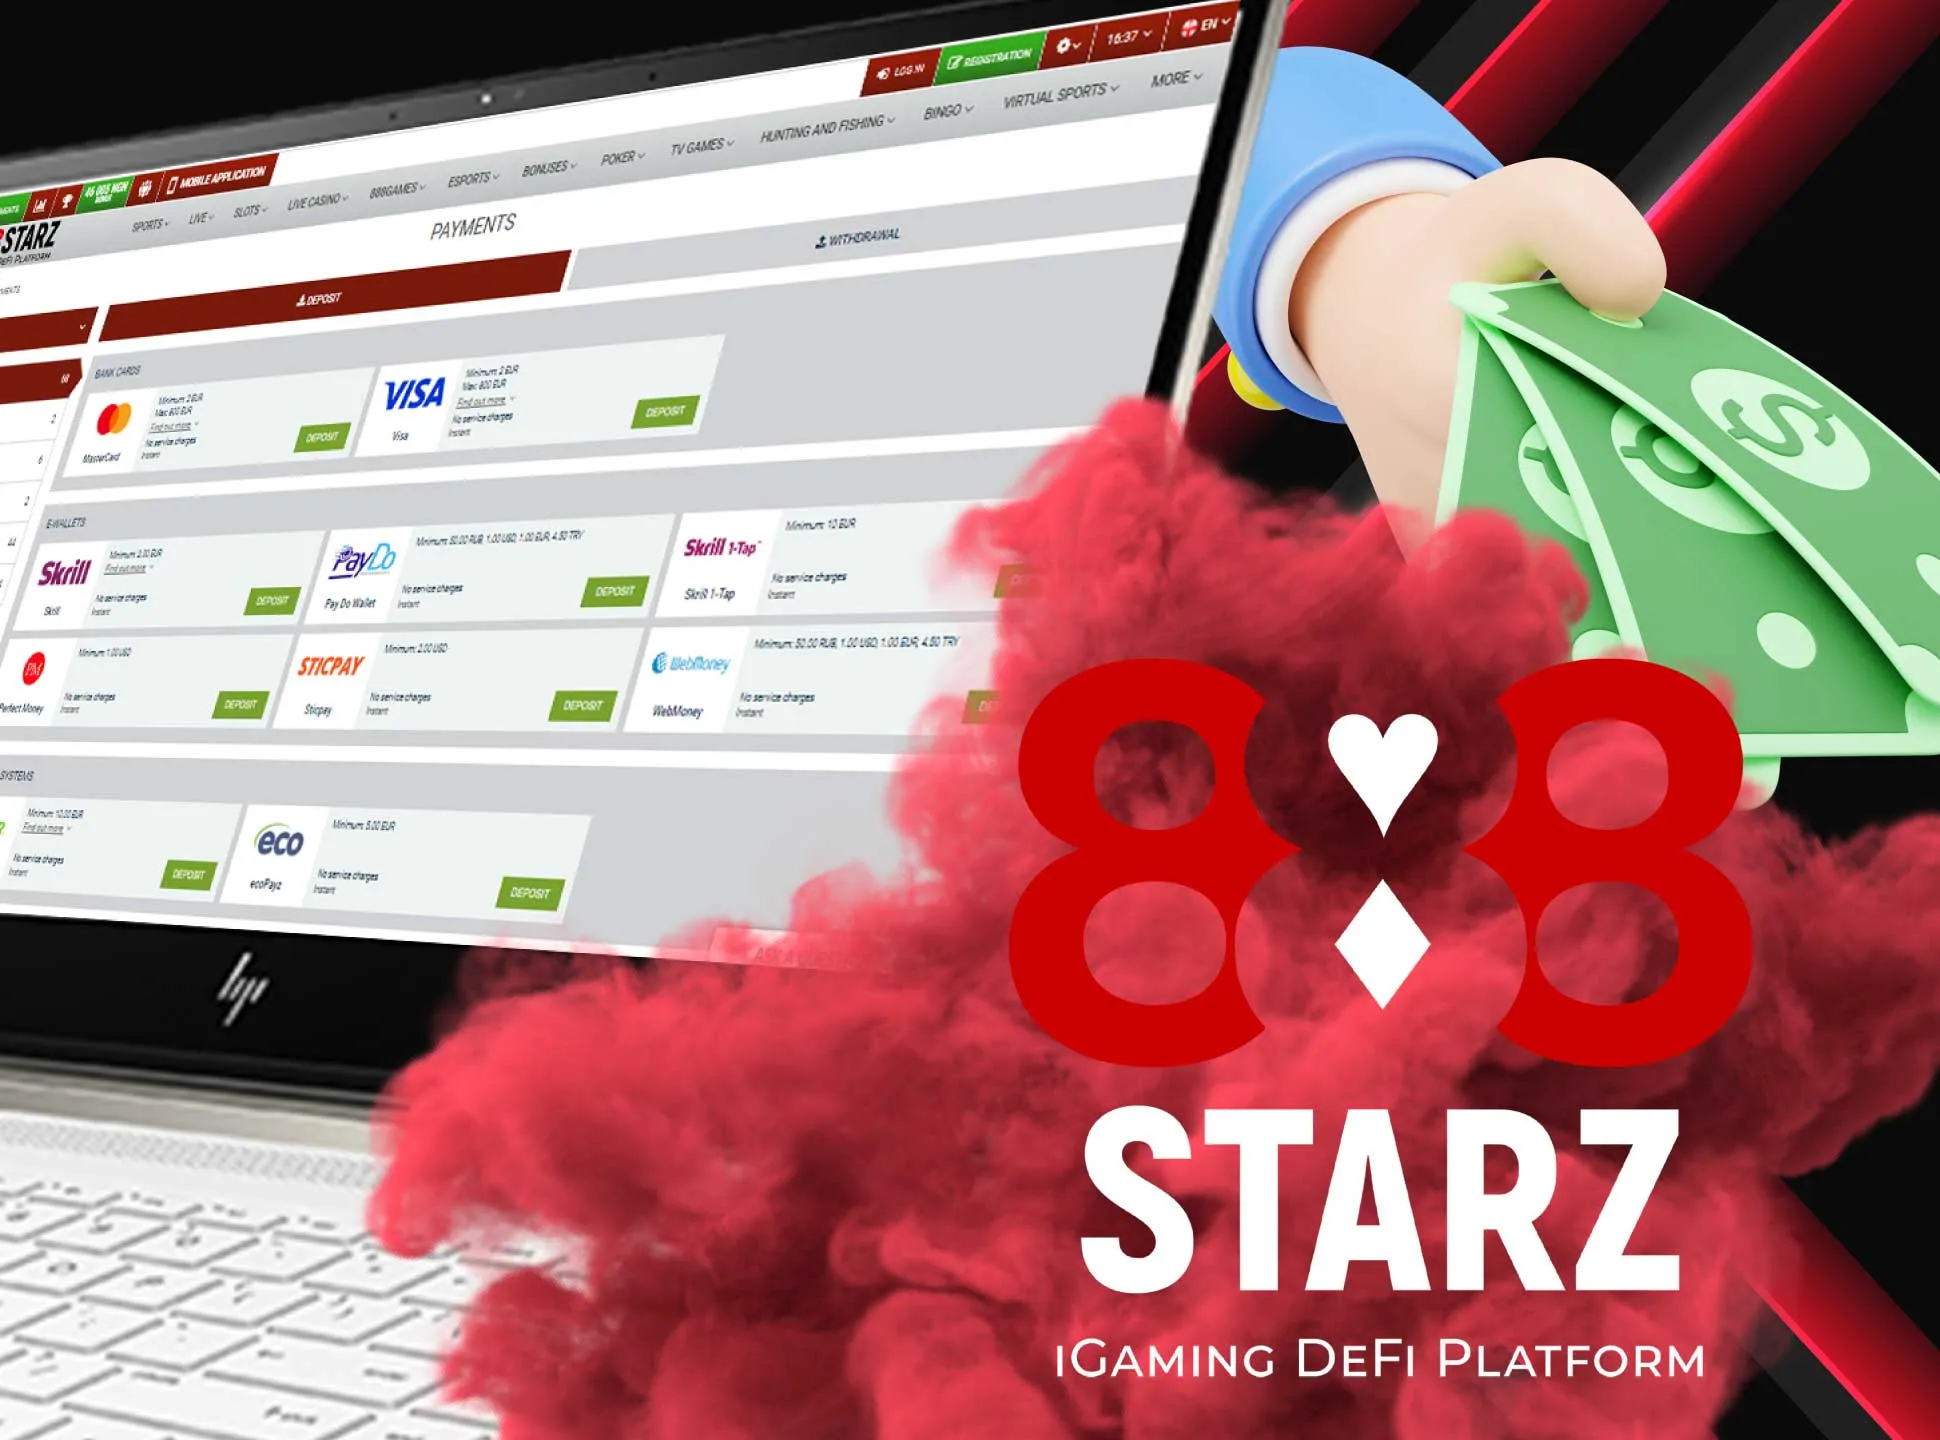 Follow our instructions to withdraw money from 888starz.